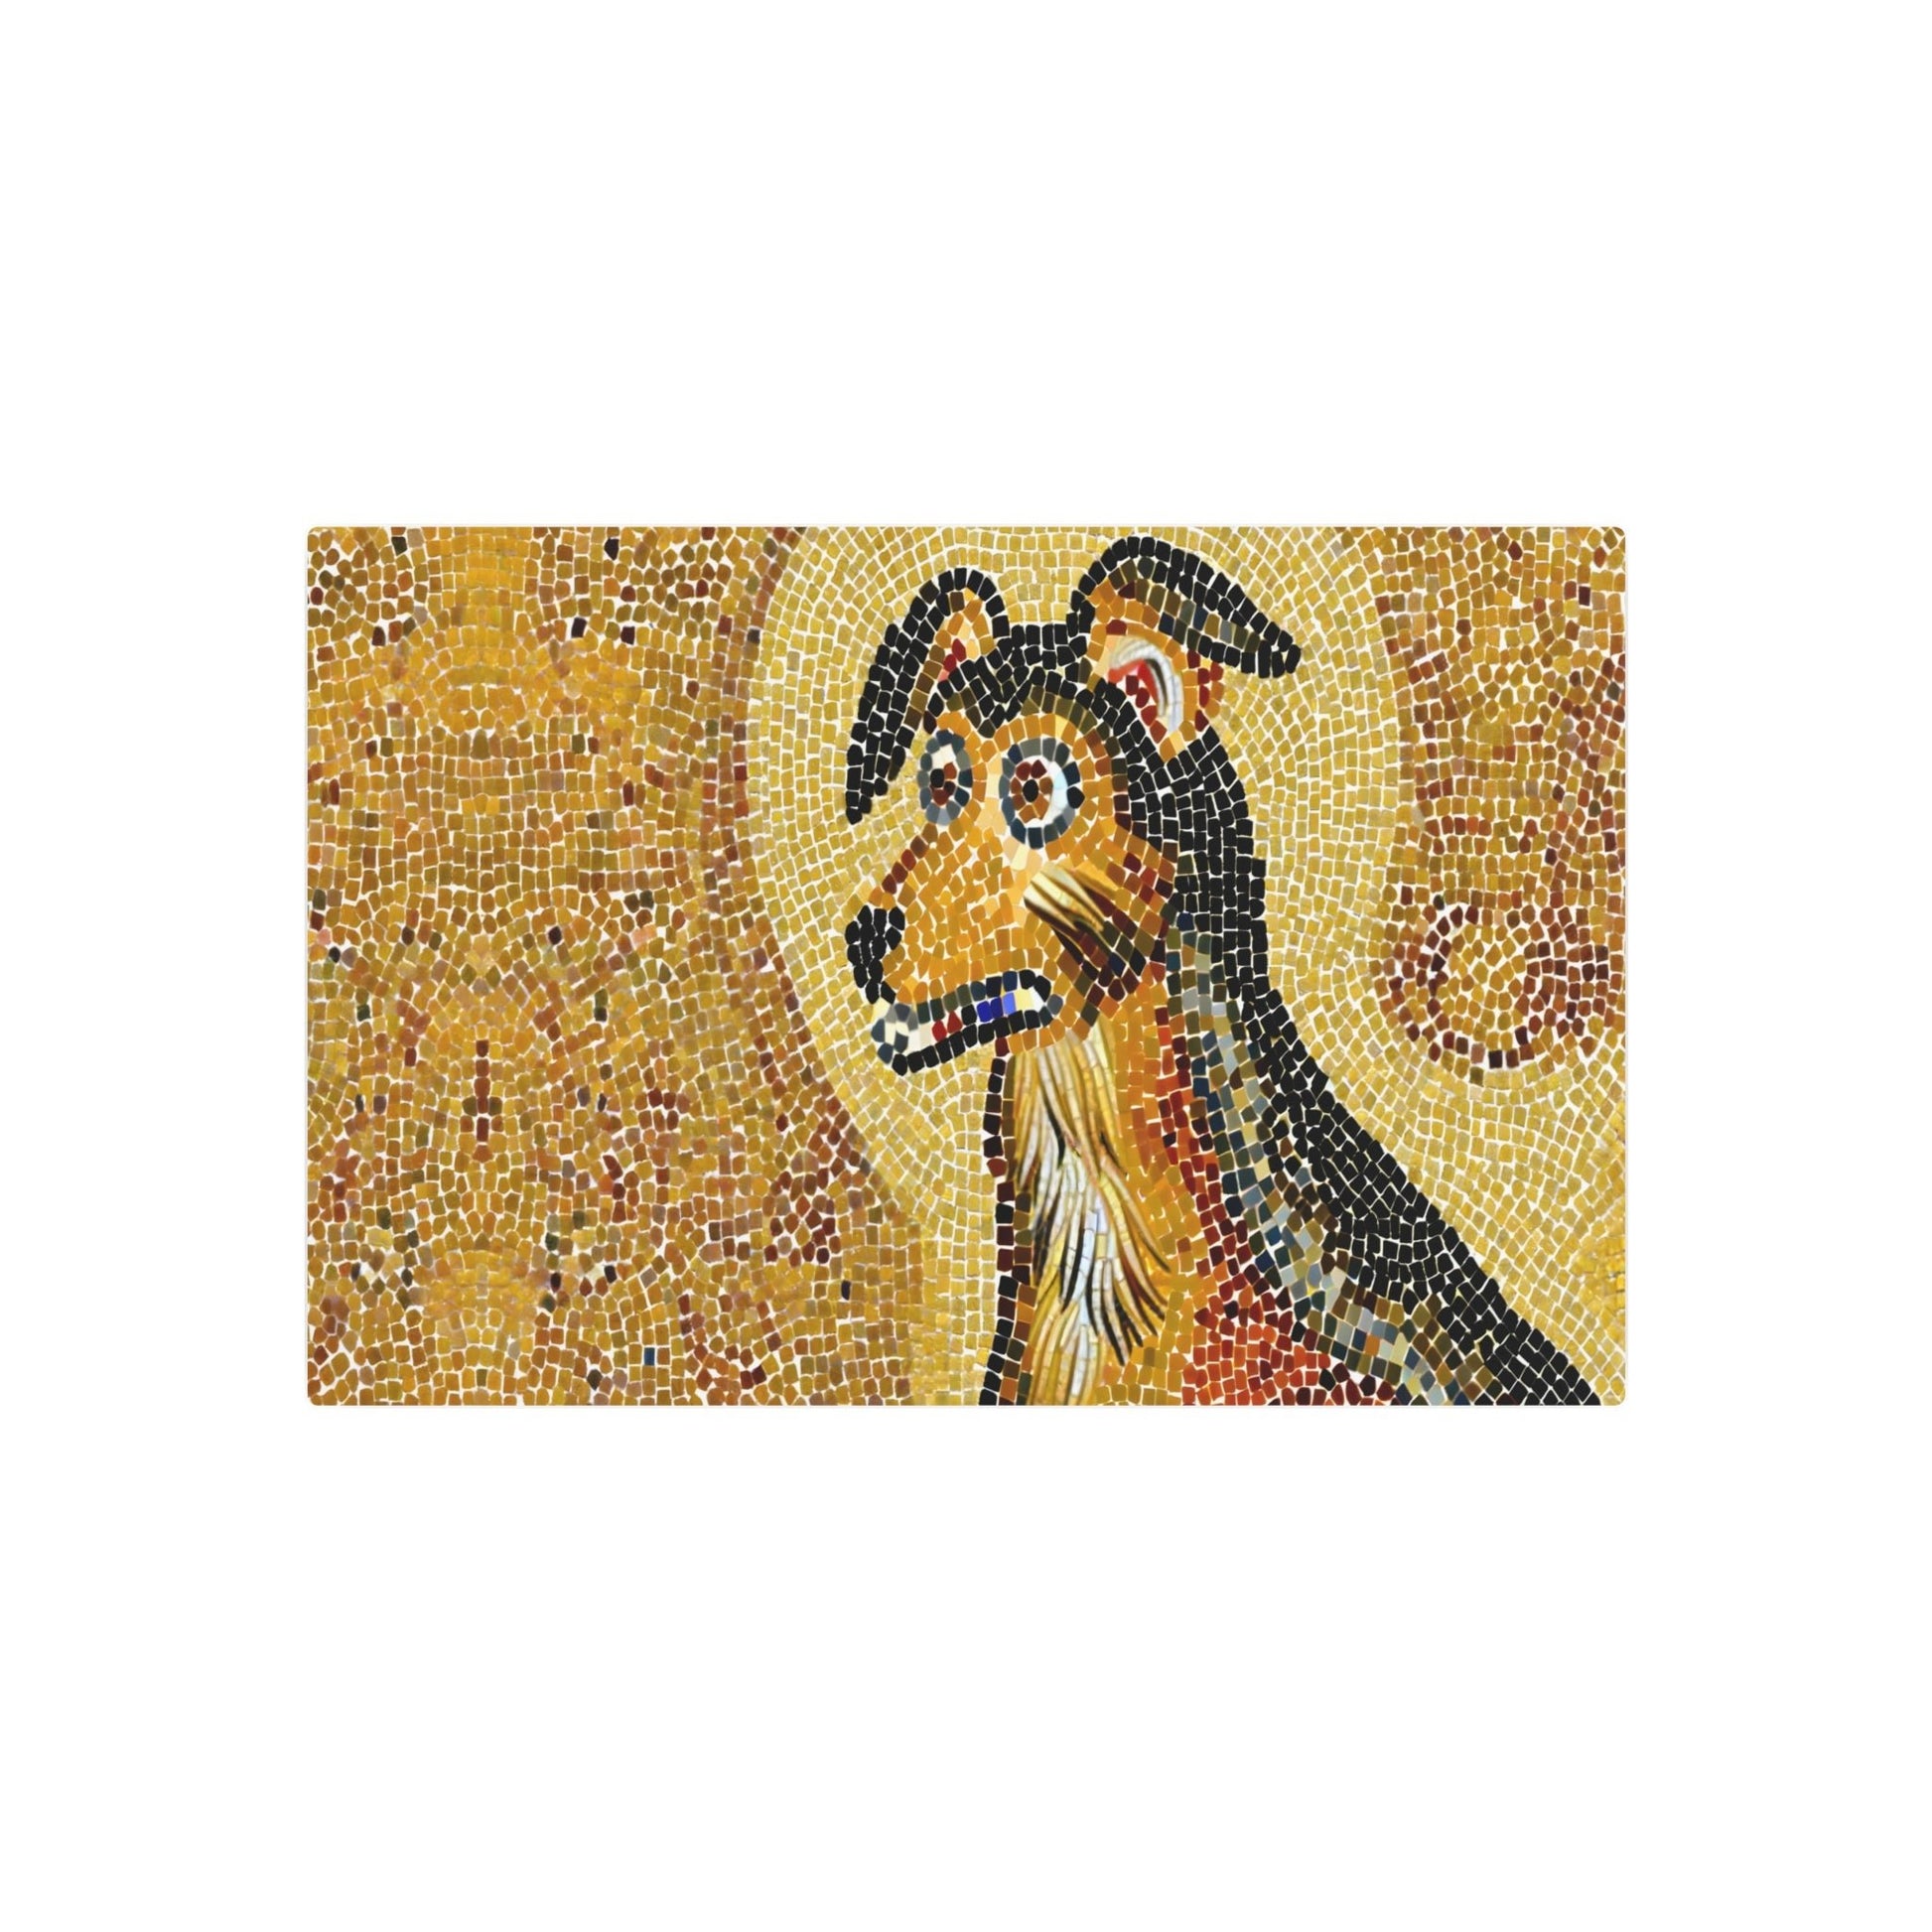 Metal Poster Art | "Byzantine Art Style Dog Image with Detailed Mosaics and Gold Backgrounds - Unique Non-Western & Global Styles Artwork" - Metal Poster Art 30″ x 20″ (Horizontal) 0.12''